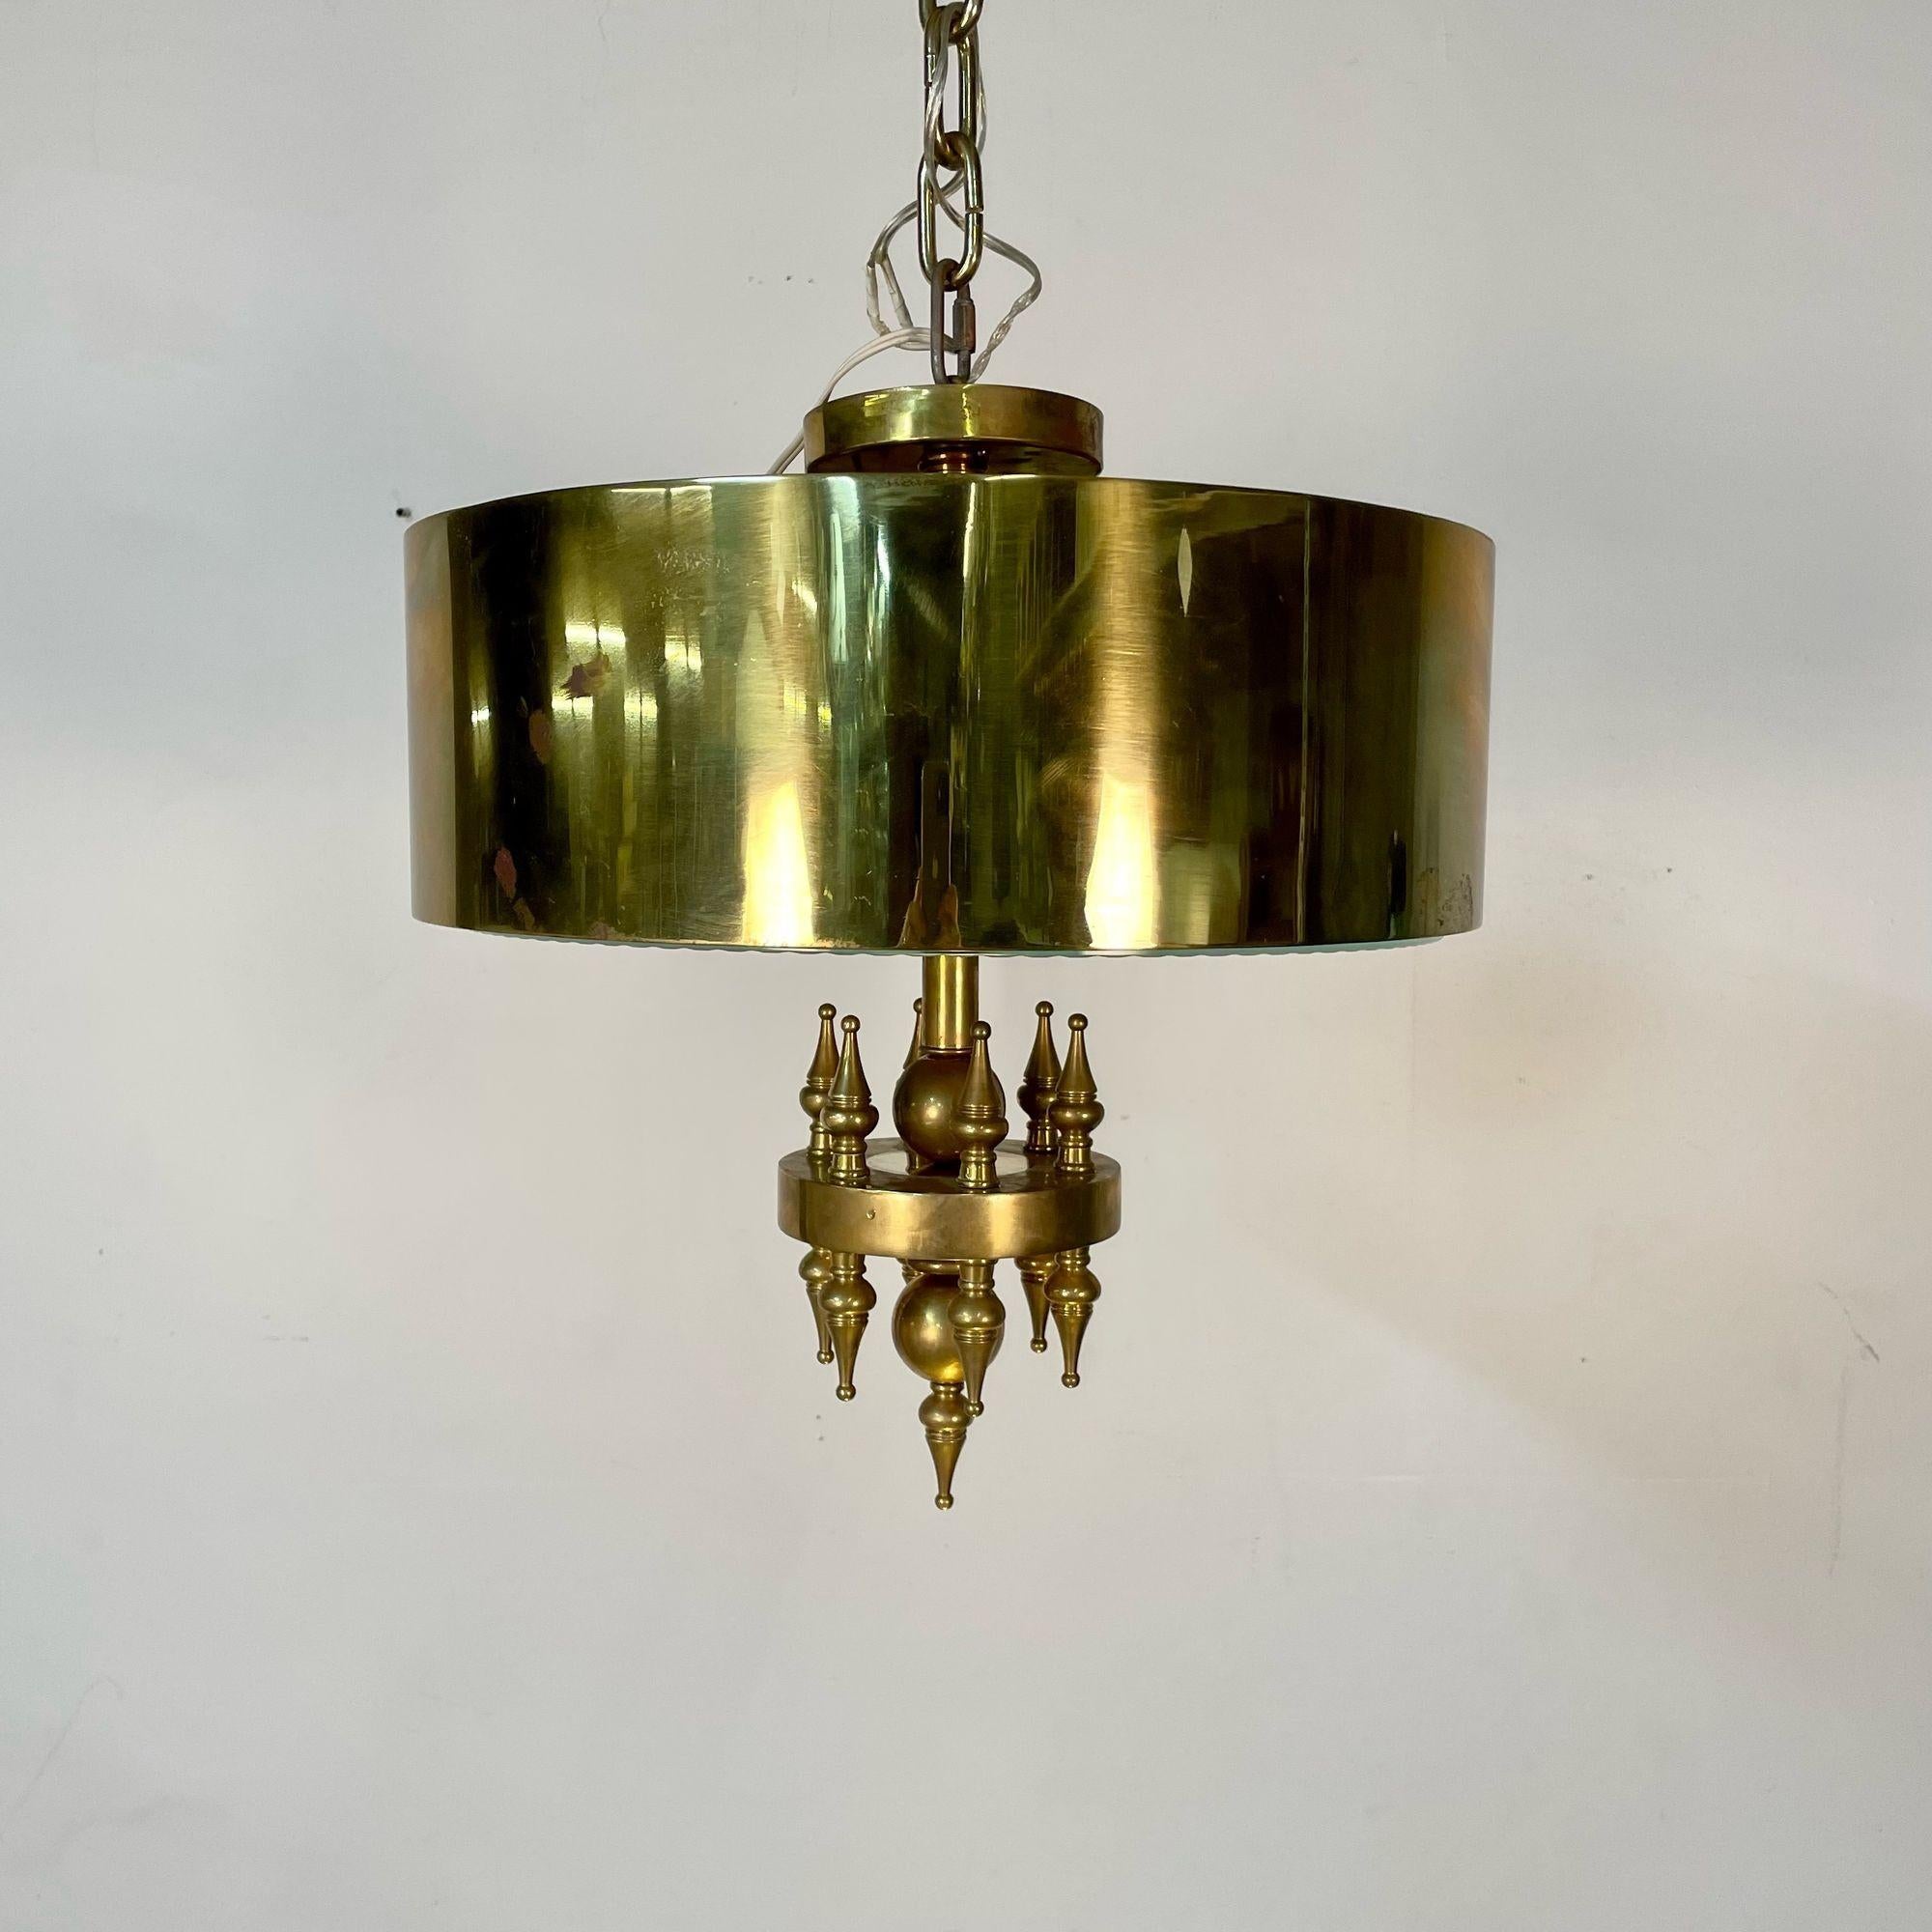 Small Hollywood Regency Style Brass Pendant / Chandelier, Starburst Etched Glass

Well made diminutive chandelier or pendant having a brass frame with an intricately etched starburst glass on the underside.

Brass, Etched Glass
United States,